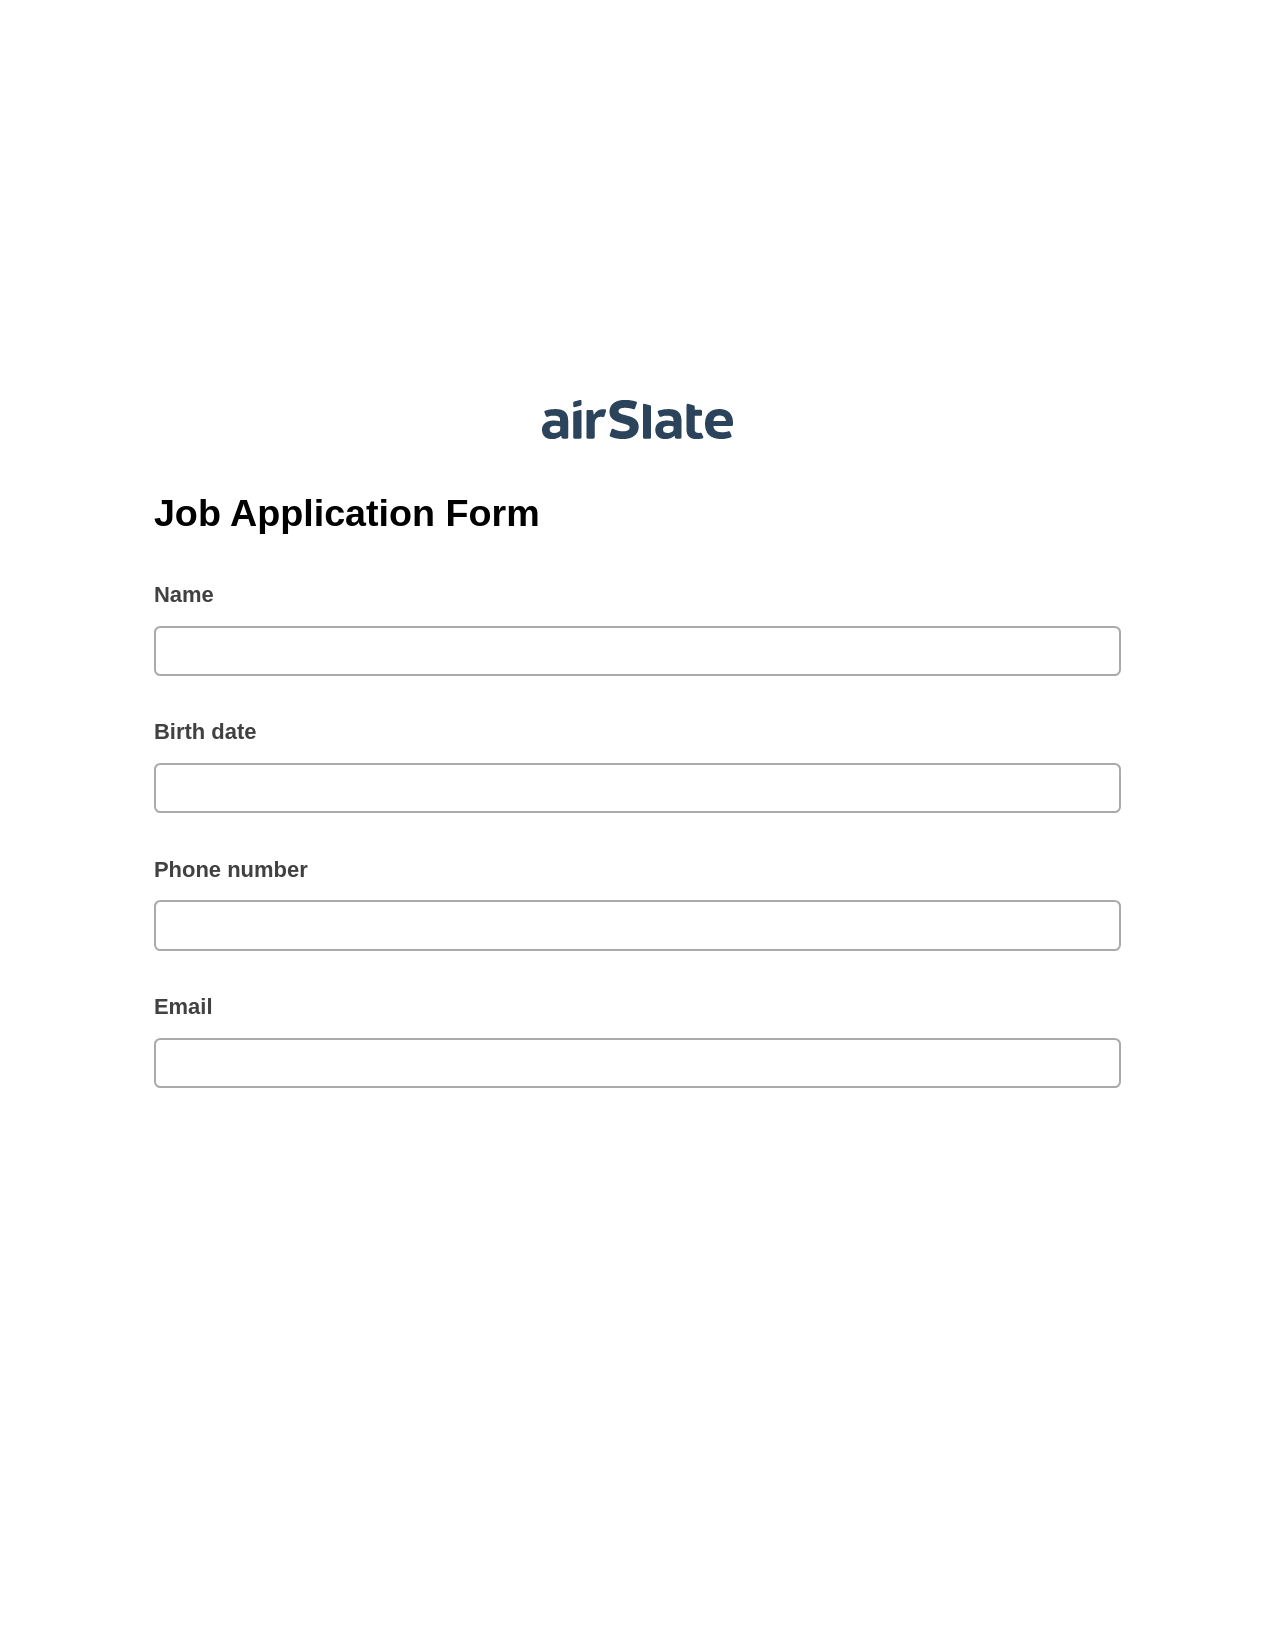 Multirole Job Application Form Pre-fill from MySQL Bot, Create MS Dynamics 365 Records Bot, Export to Formstack Documents Bot